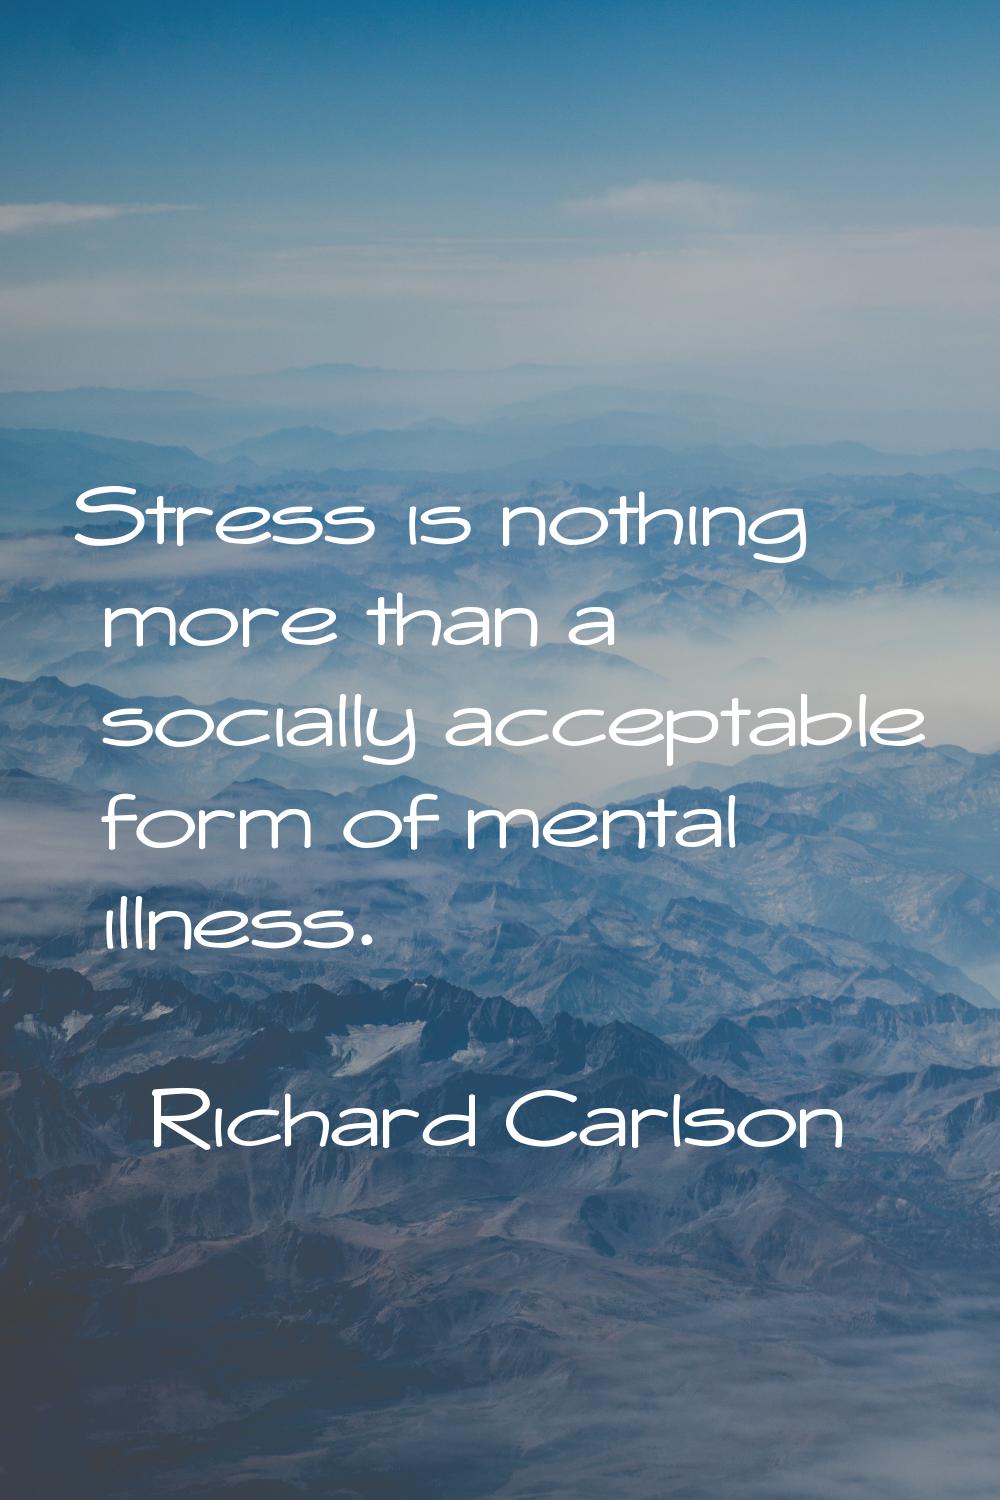 Stress is nothing more than a socially acceptable form of mental illness.